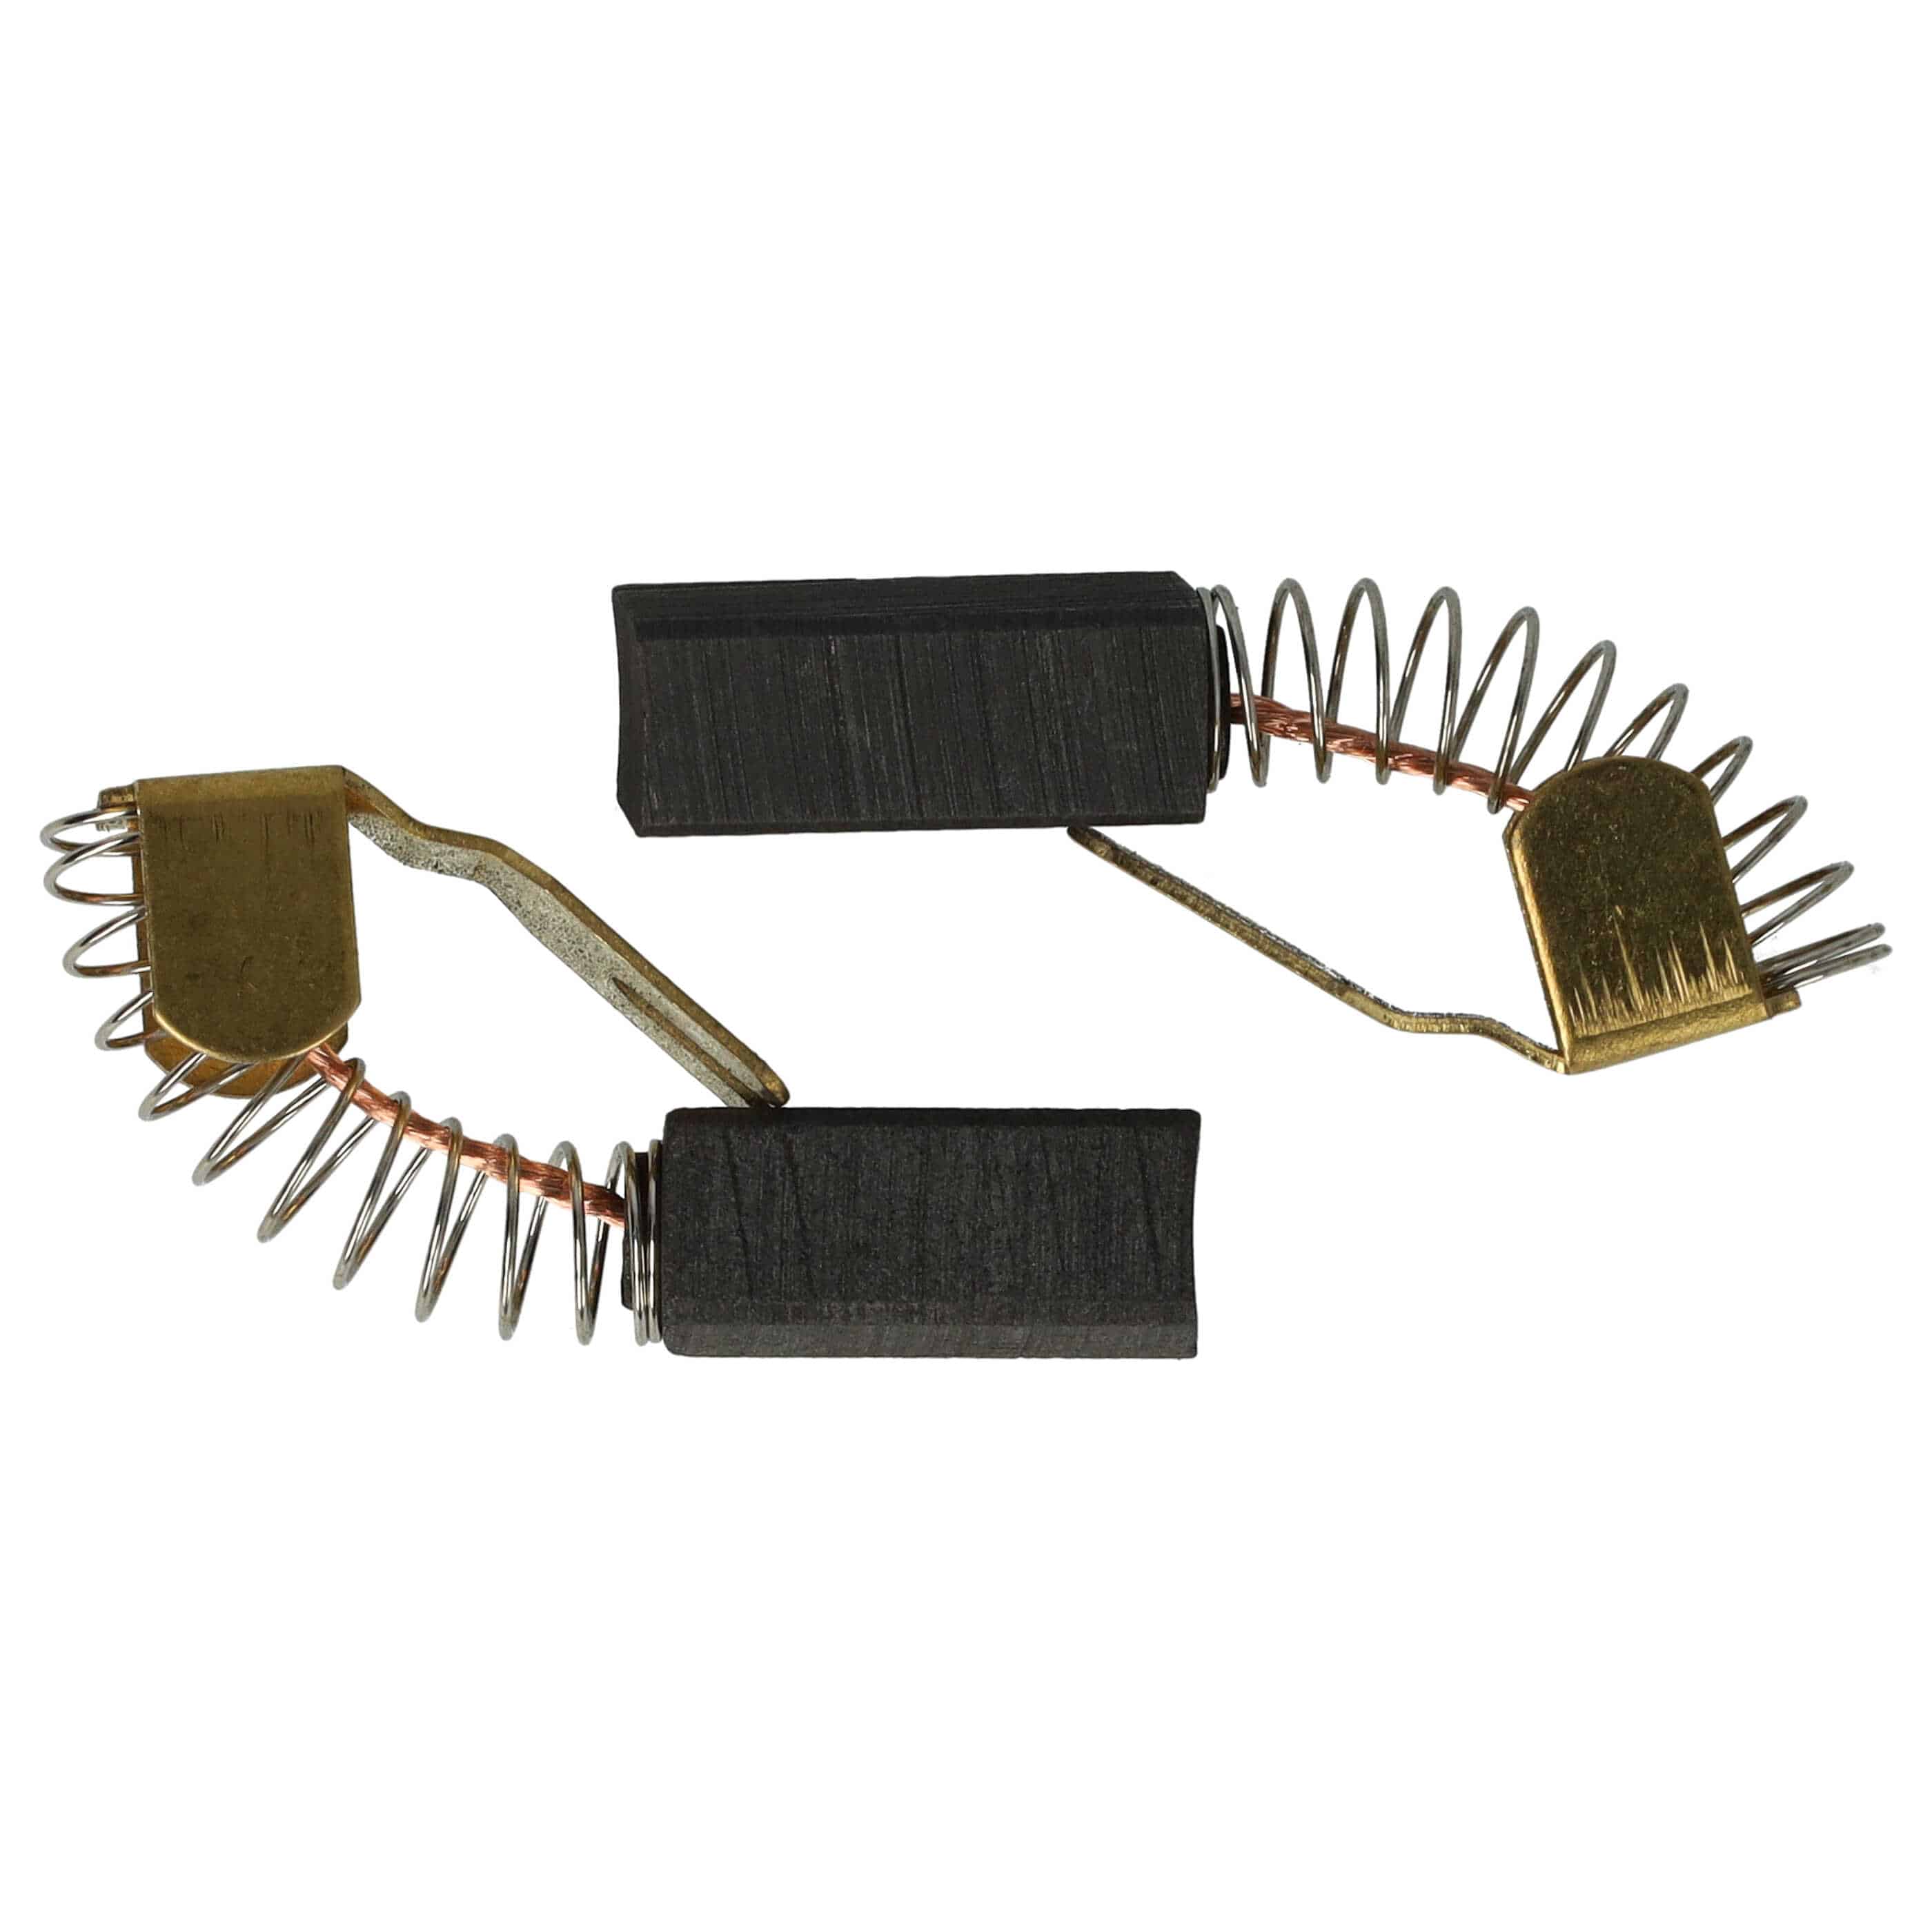 2x Carbon Brush as Replacement for Metabo 34301118, 316033640 Electric Power Tools + Spring, 15 x 8 x 6.3mm